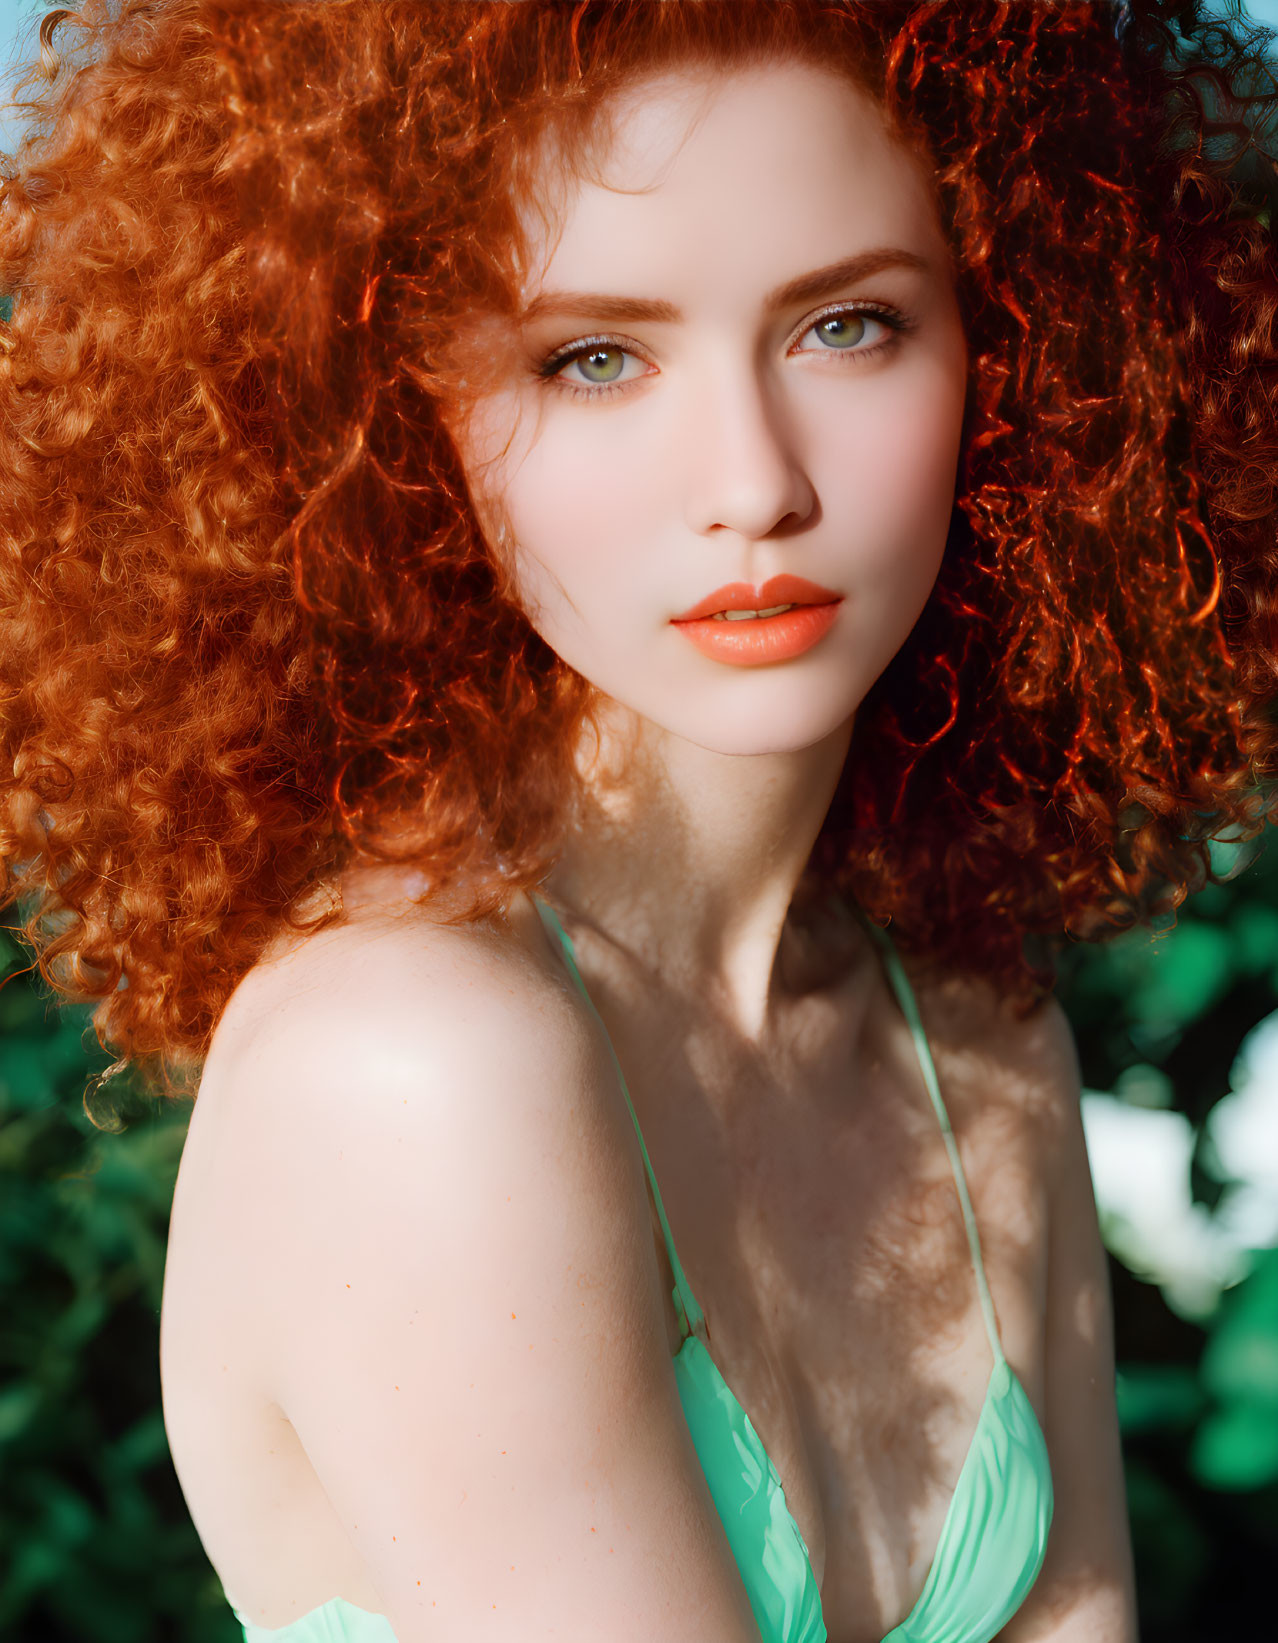 Curly Red-Haired Woman with Blue Eyes in Green Top